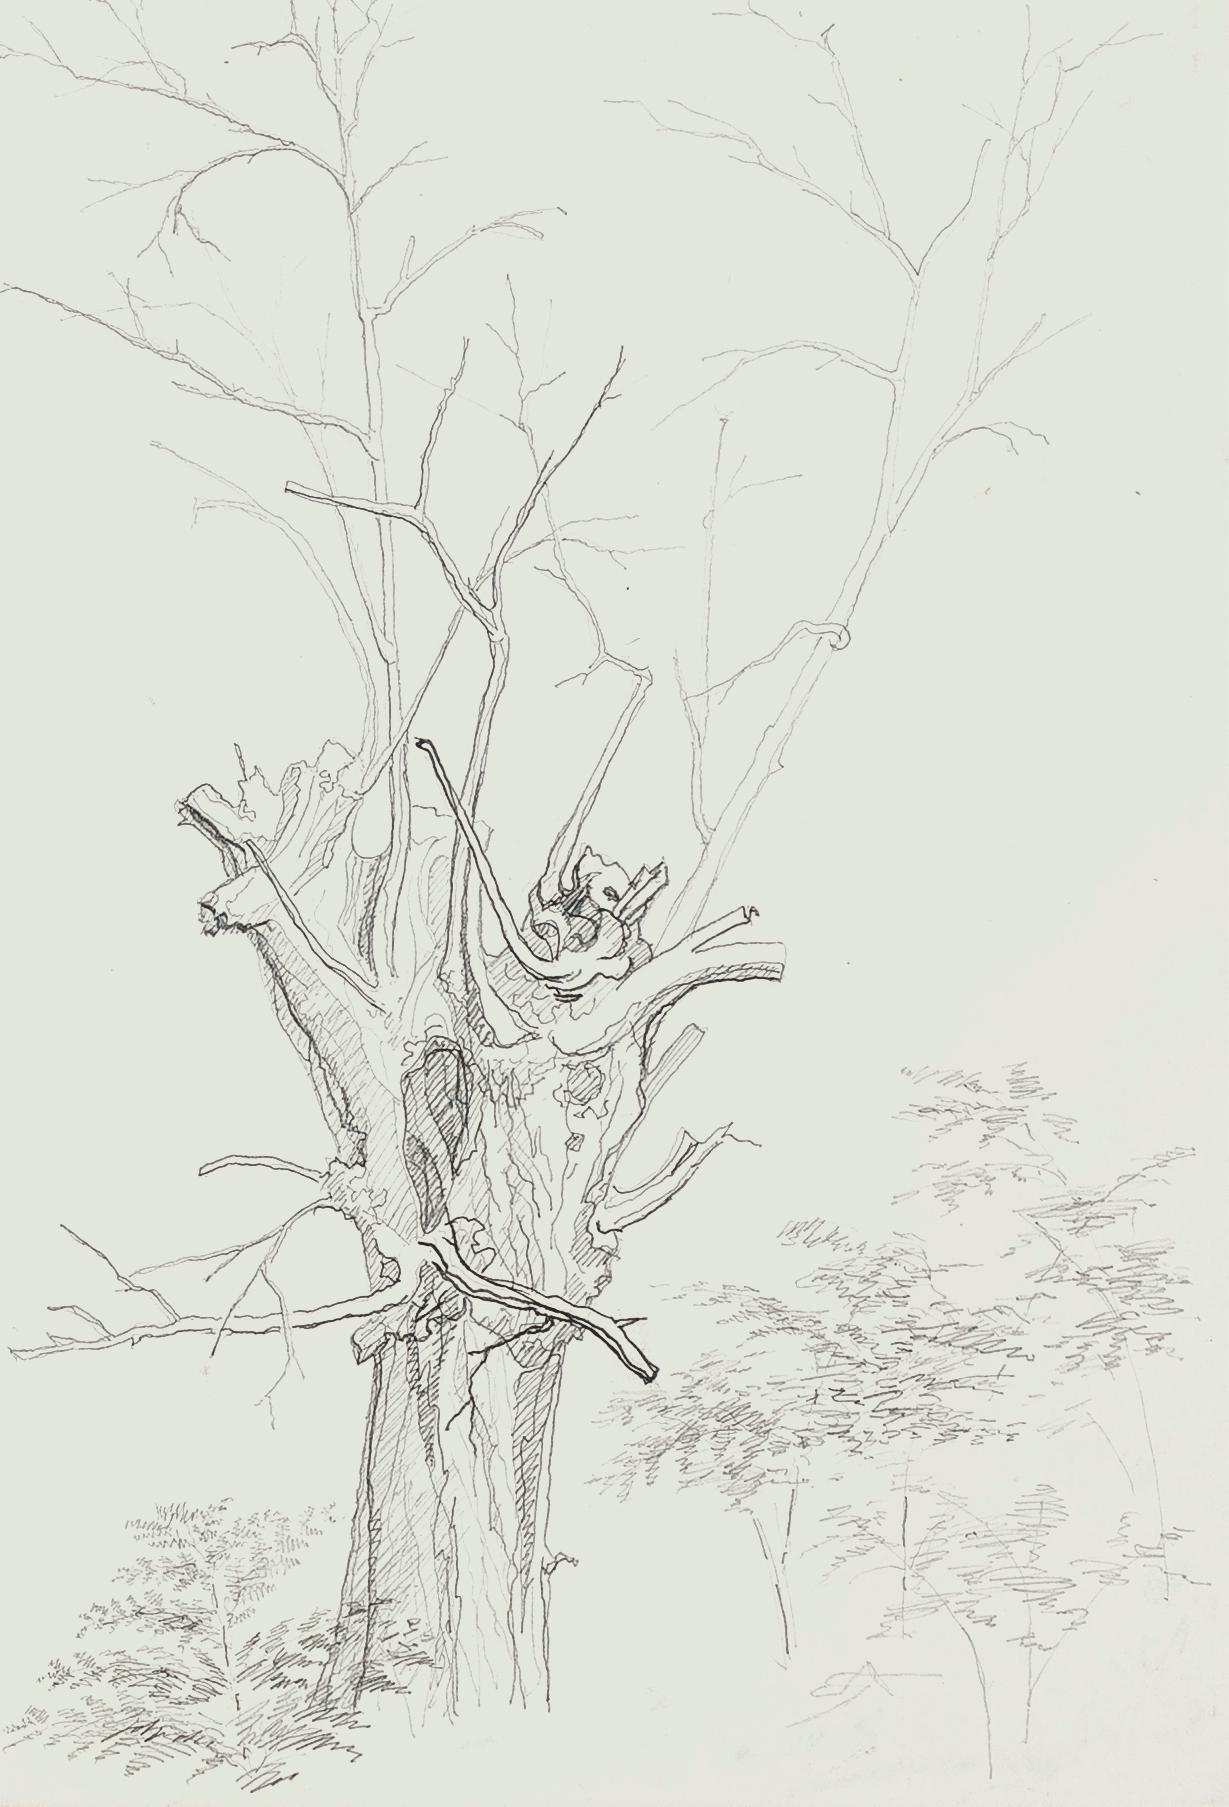 Unknown Figurative Art - Winter Tree - Original Pencil Drawing by French Master mid 20th Century